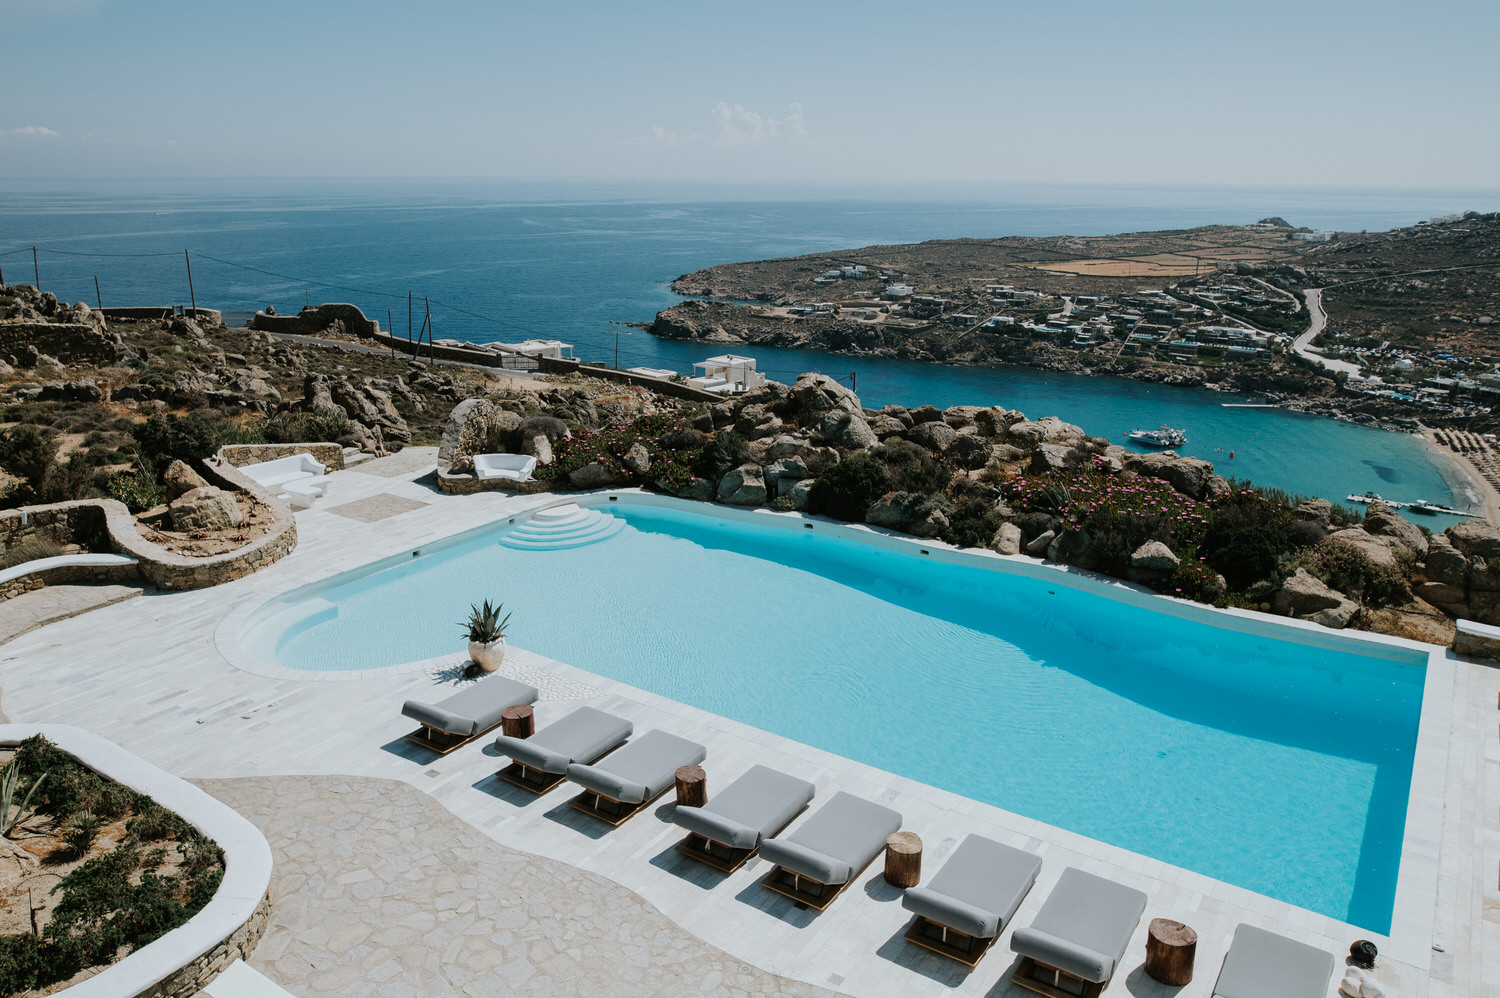 Mykonos wedding photographer: beautiful large pool surrounded by Mykonian rocks with the beach views and the sea in the background.